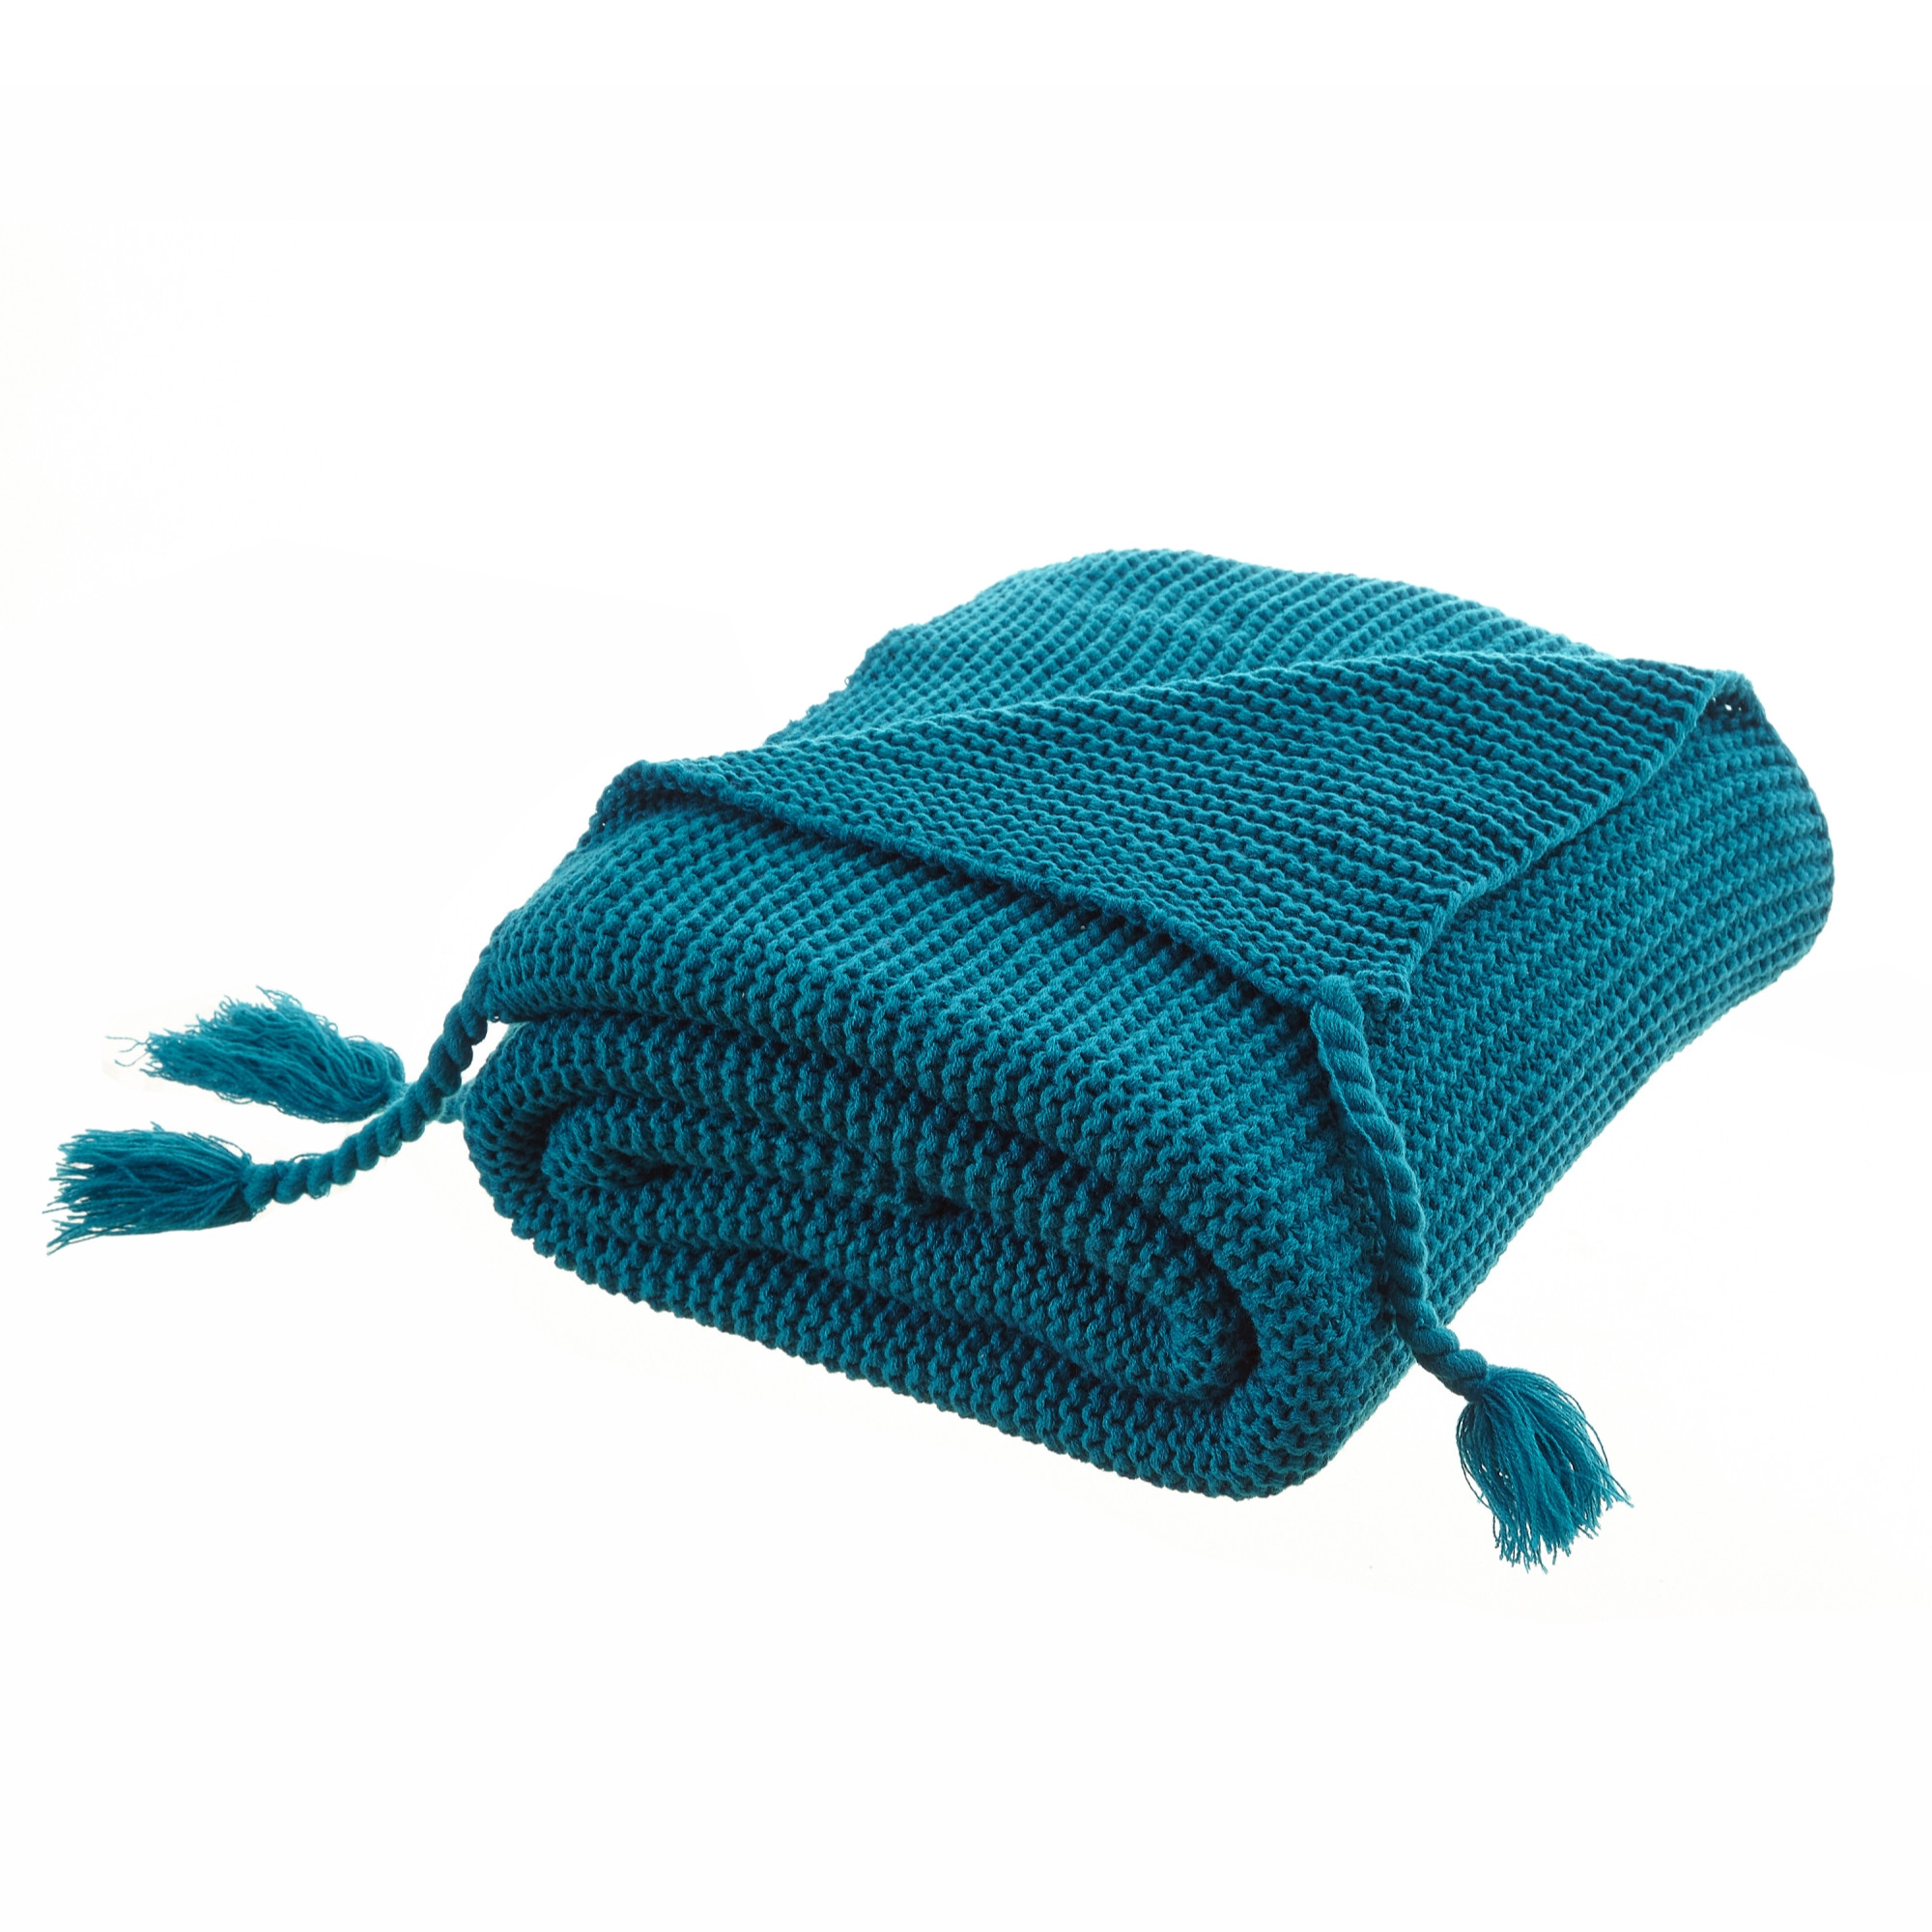 Teal Blue Knitted Acrylic Solid Color Throw Blanket-531377-1